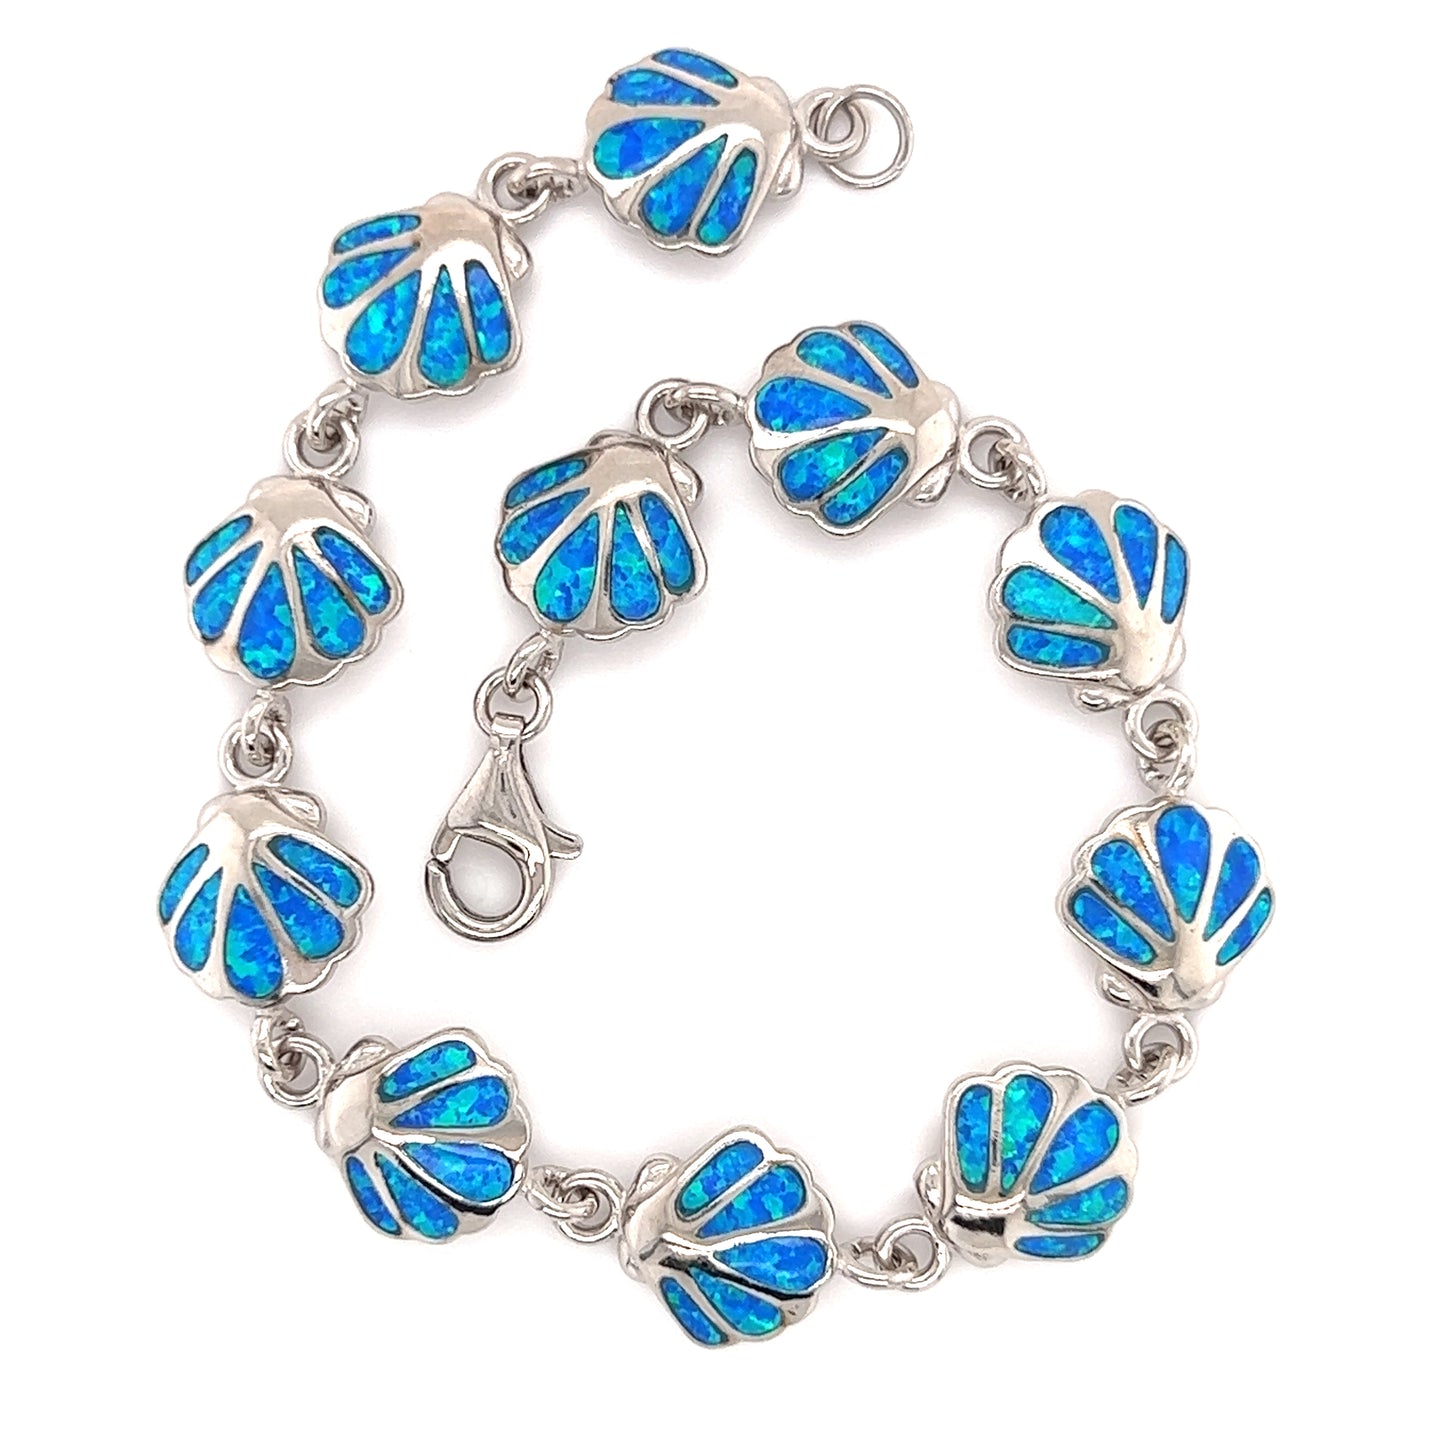 Seashell Bracelet with Blue Opal inlay in Sterling Silver Full Bracelet with Open Clasp